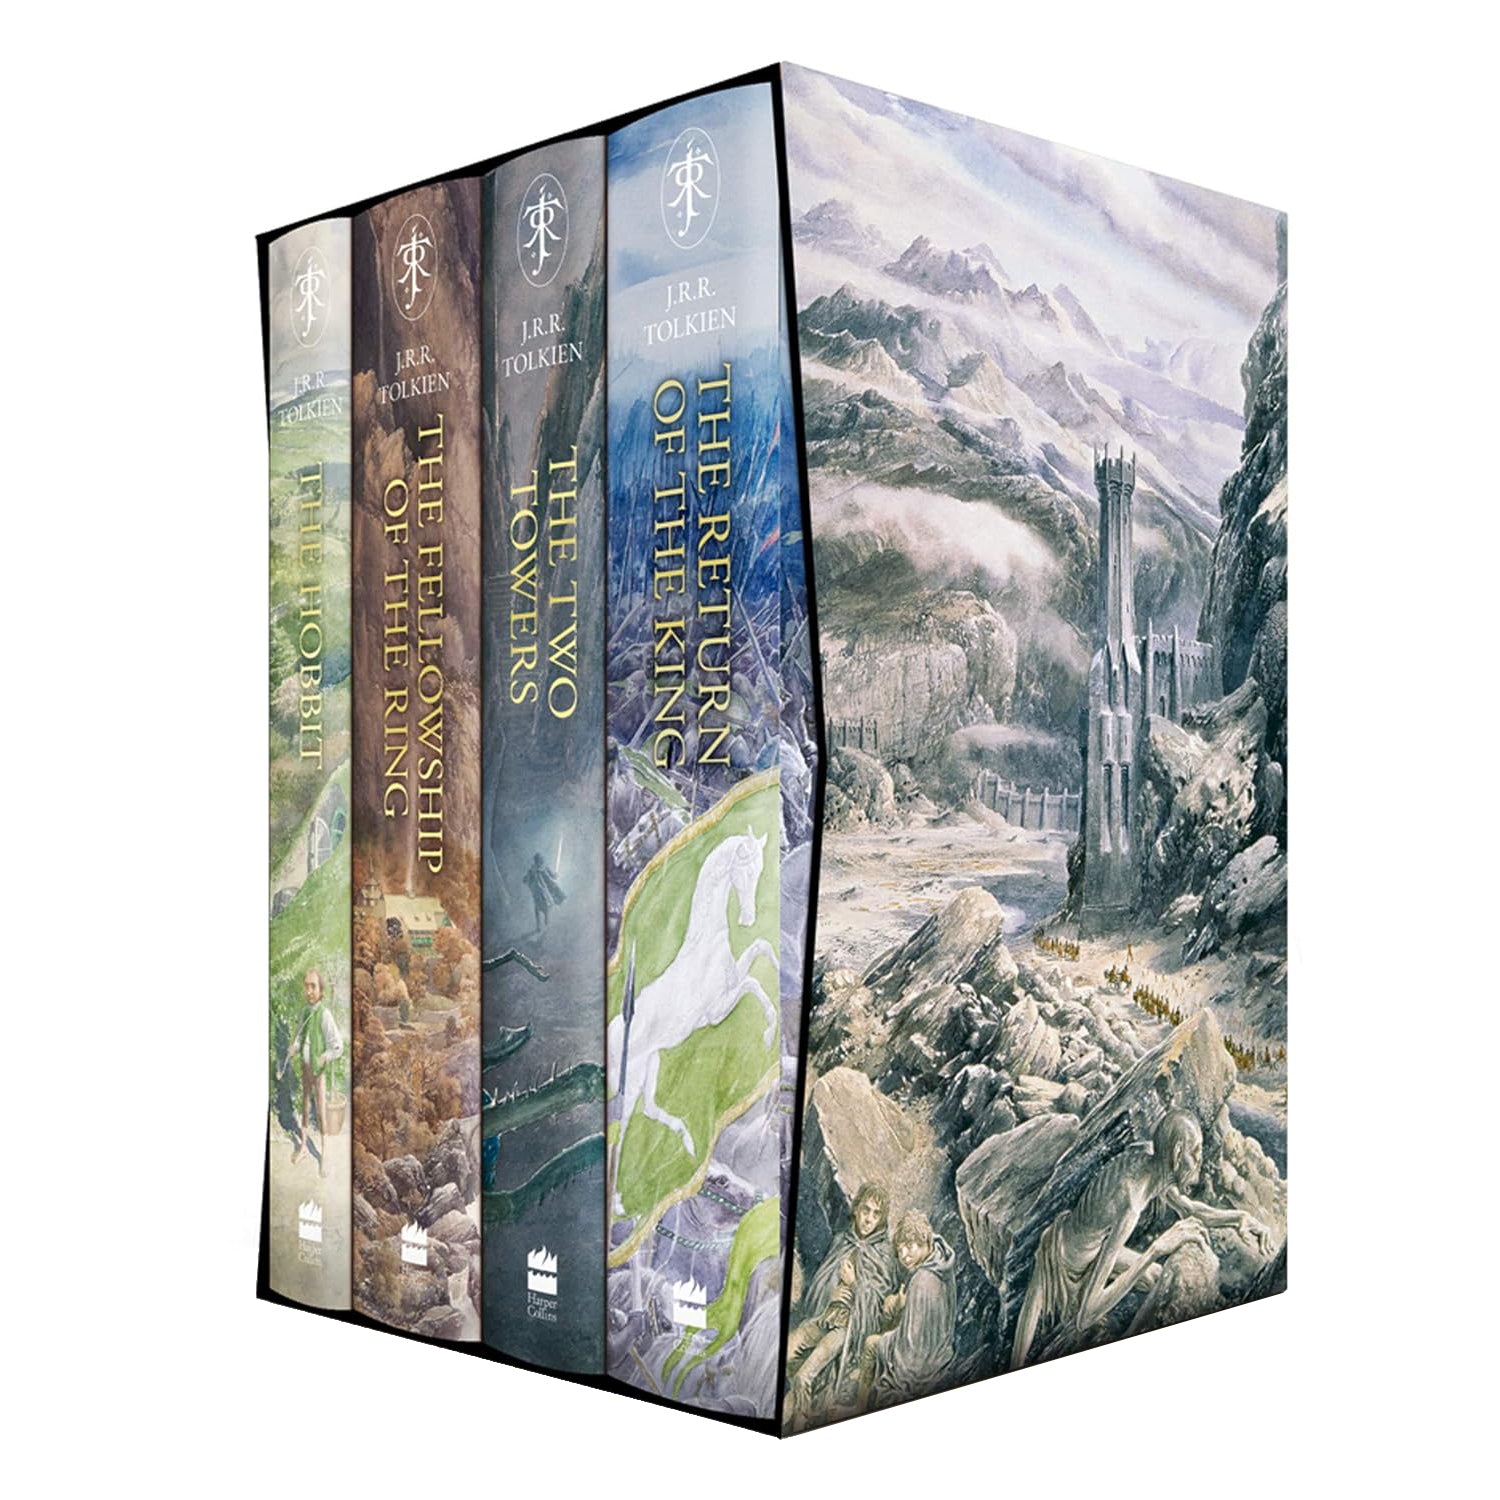 The　Online　of　Set　the　Rings　Library　Hobbit　Lee　Boxed　British　Shop　Lord　Alan